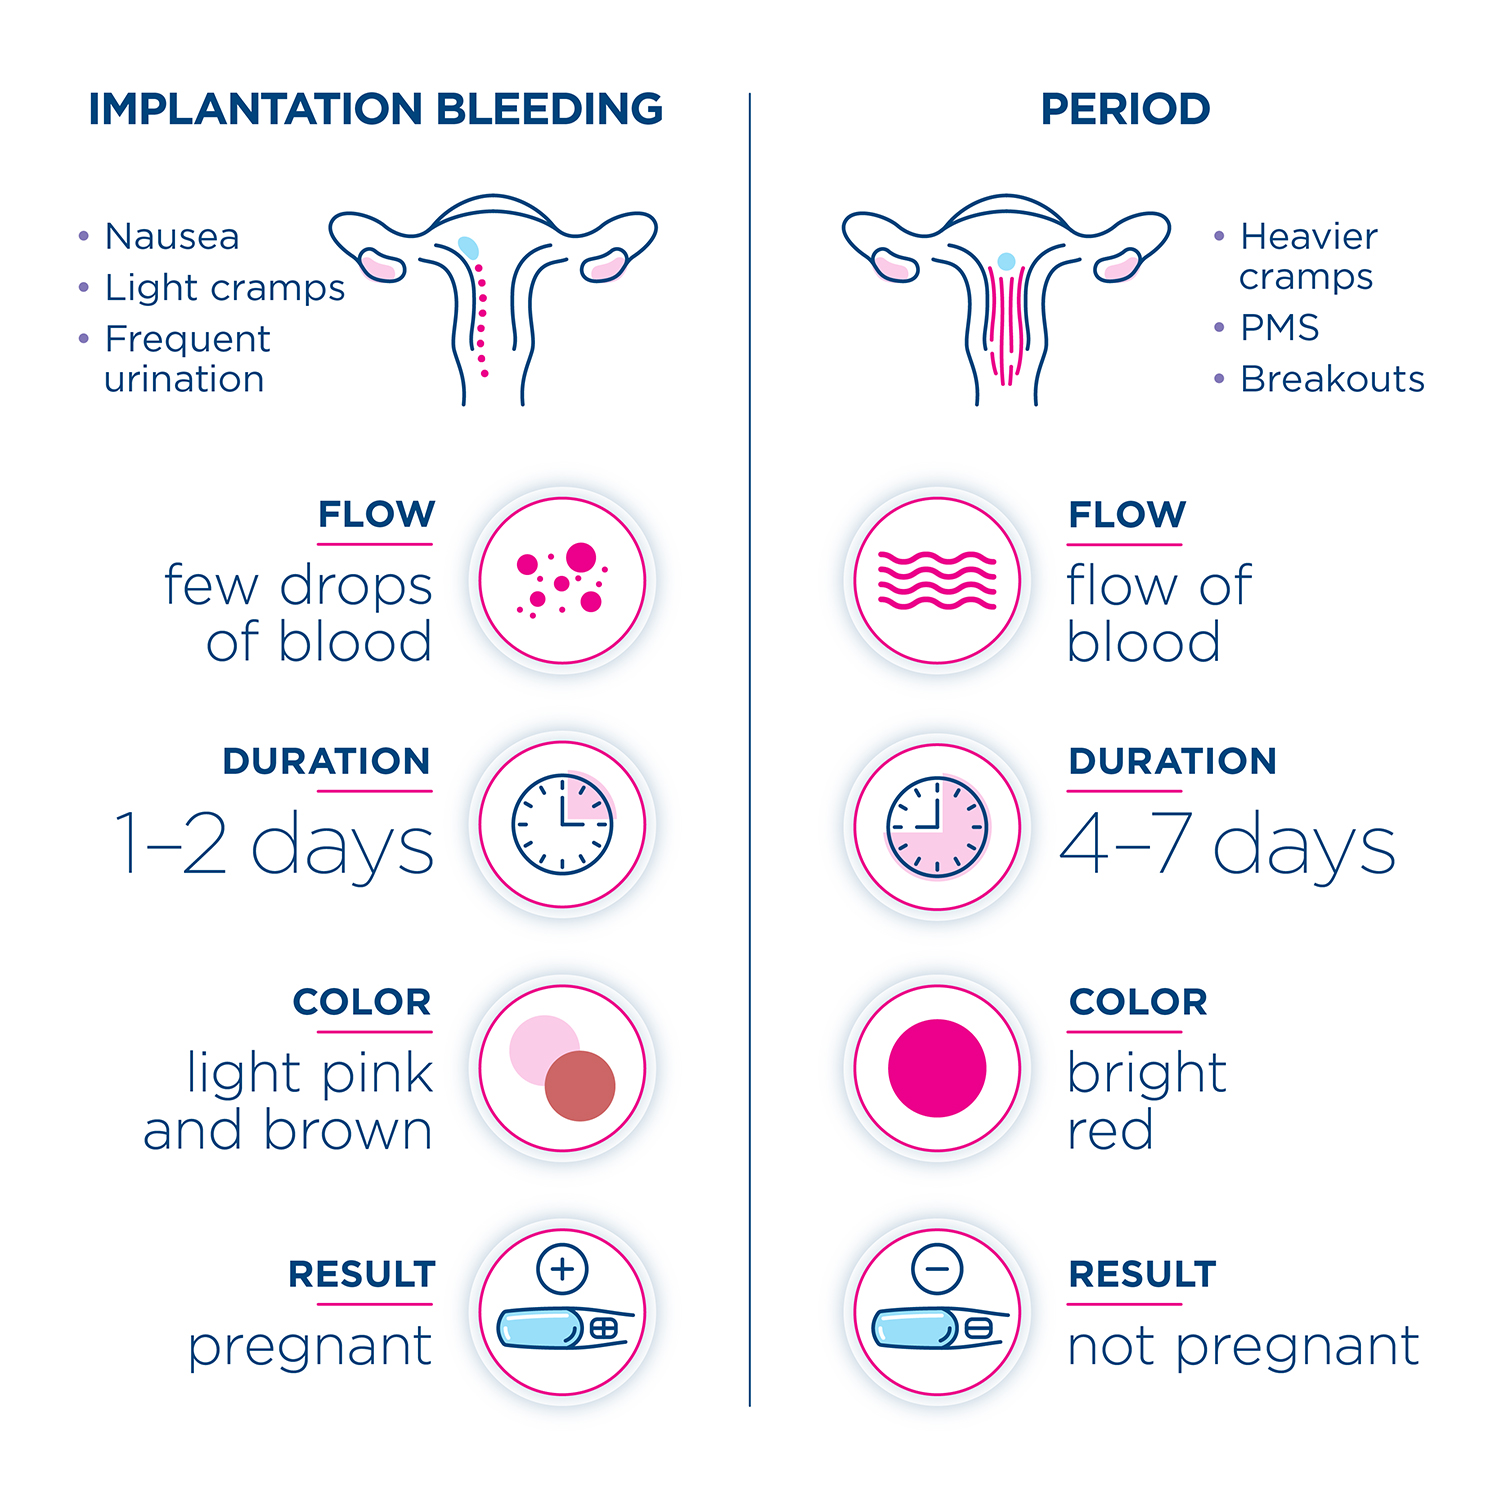 Infographic comparing the signs and symptoms to tell the difference between implantation bleeding and your period